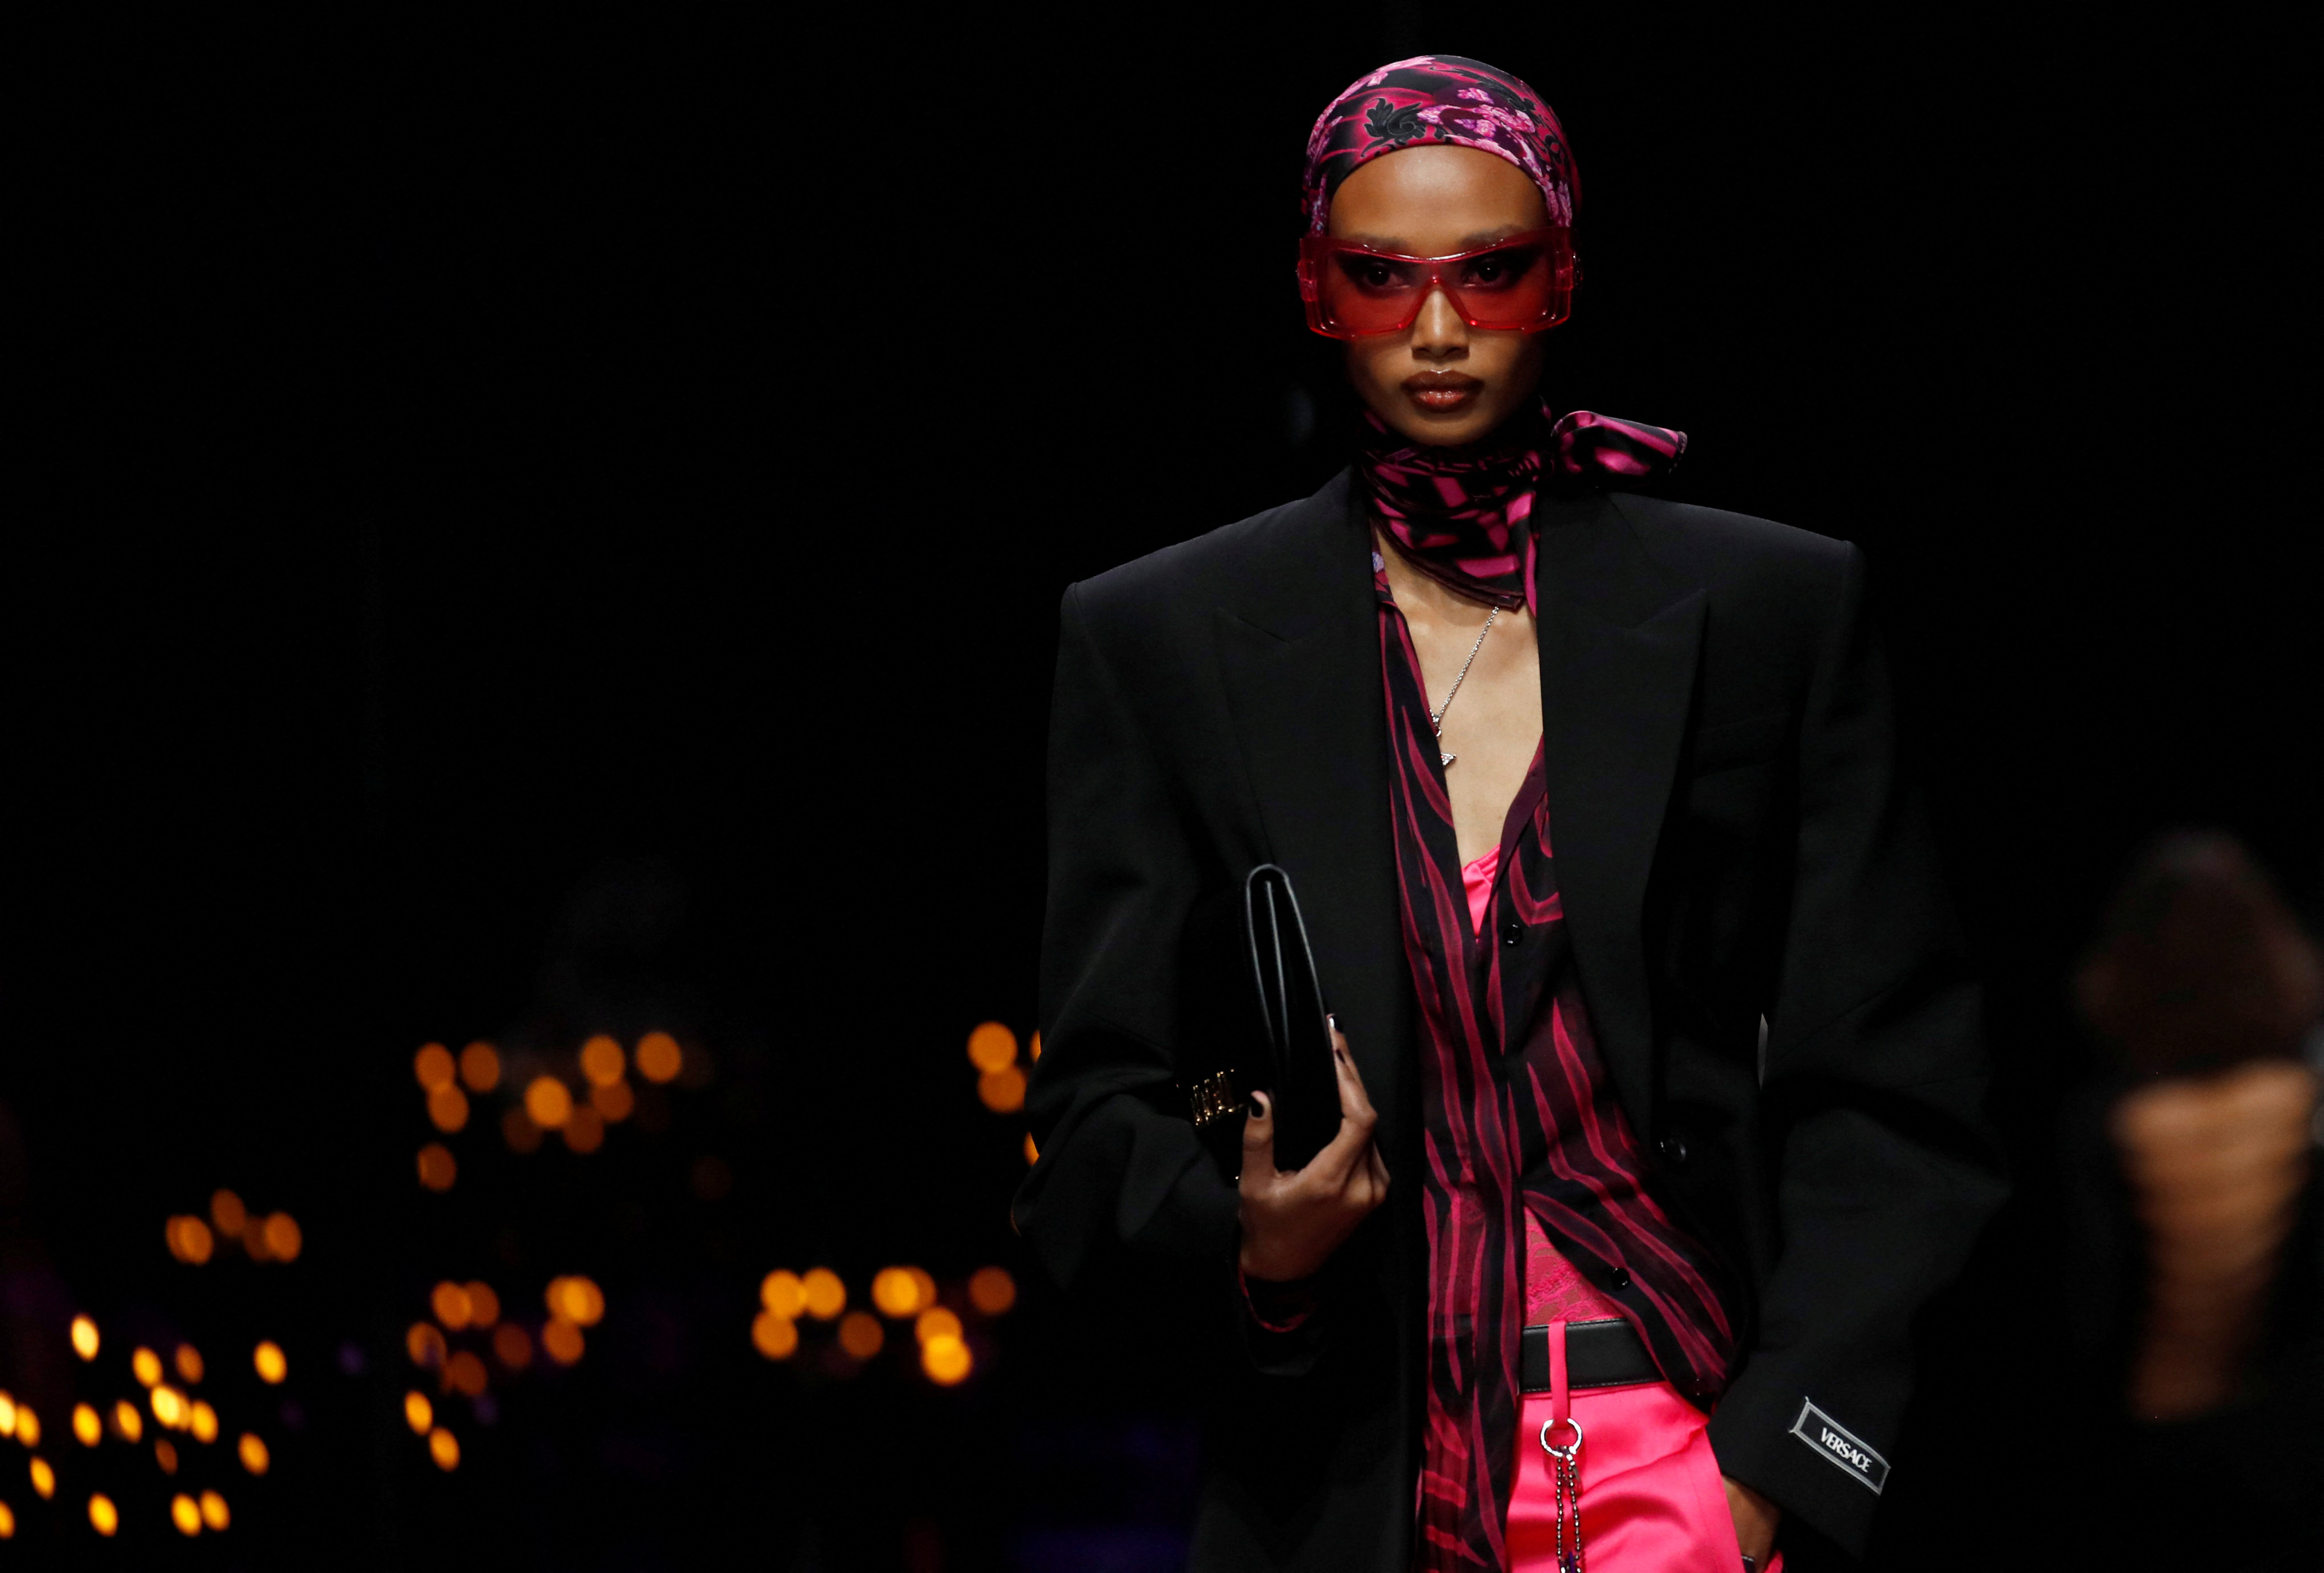 Milano Fashion Week on X: Some moments from @versace show at #MFW Never  shy or retiring, the Versace woman for Fall/Winter 2022 has a powerful and  seductive sense of mystery, shifting in